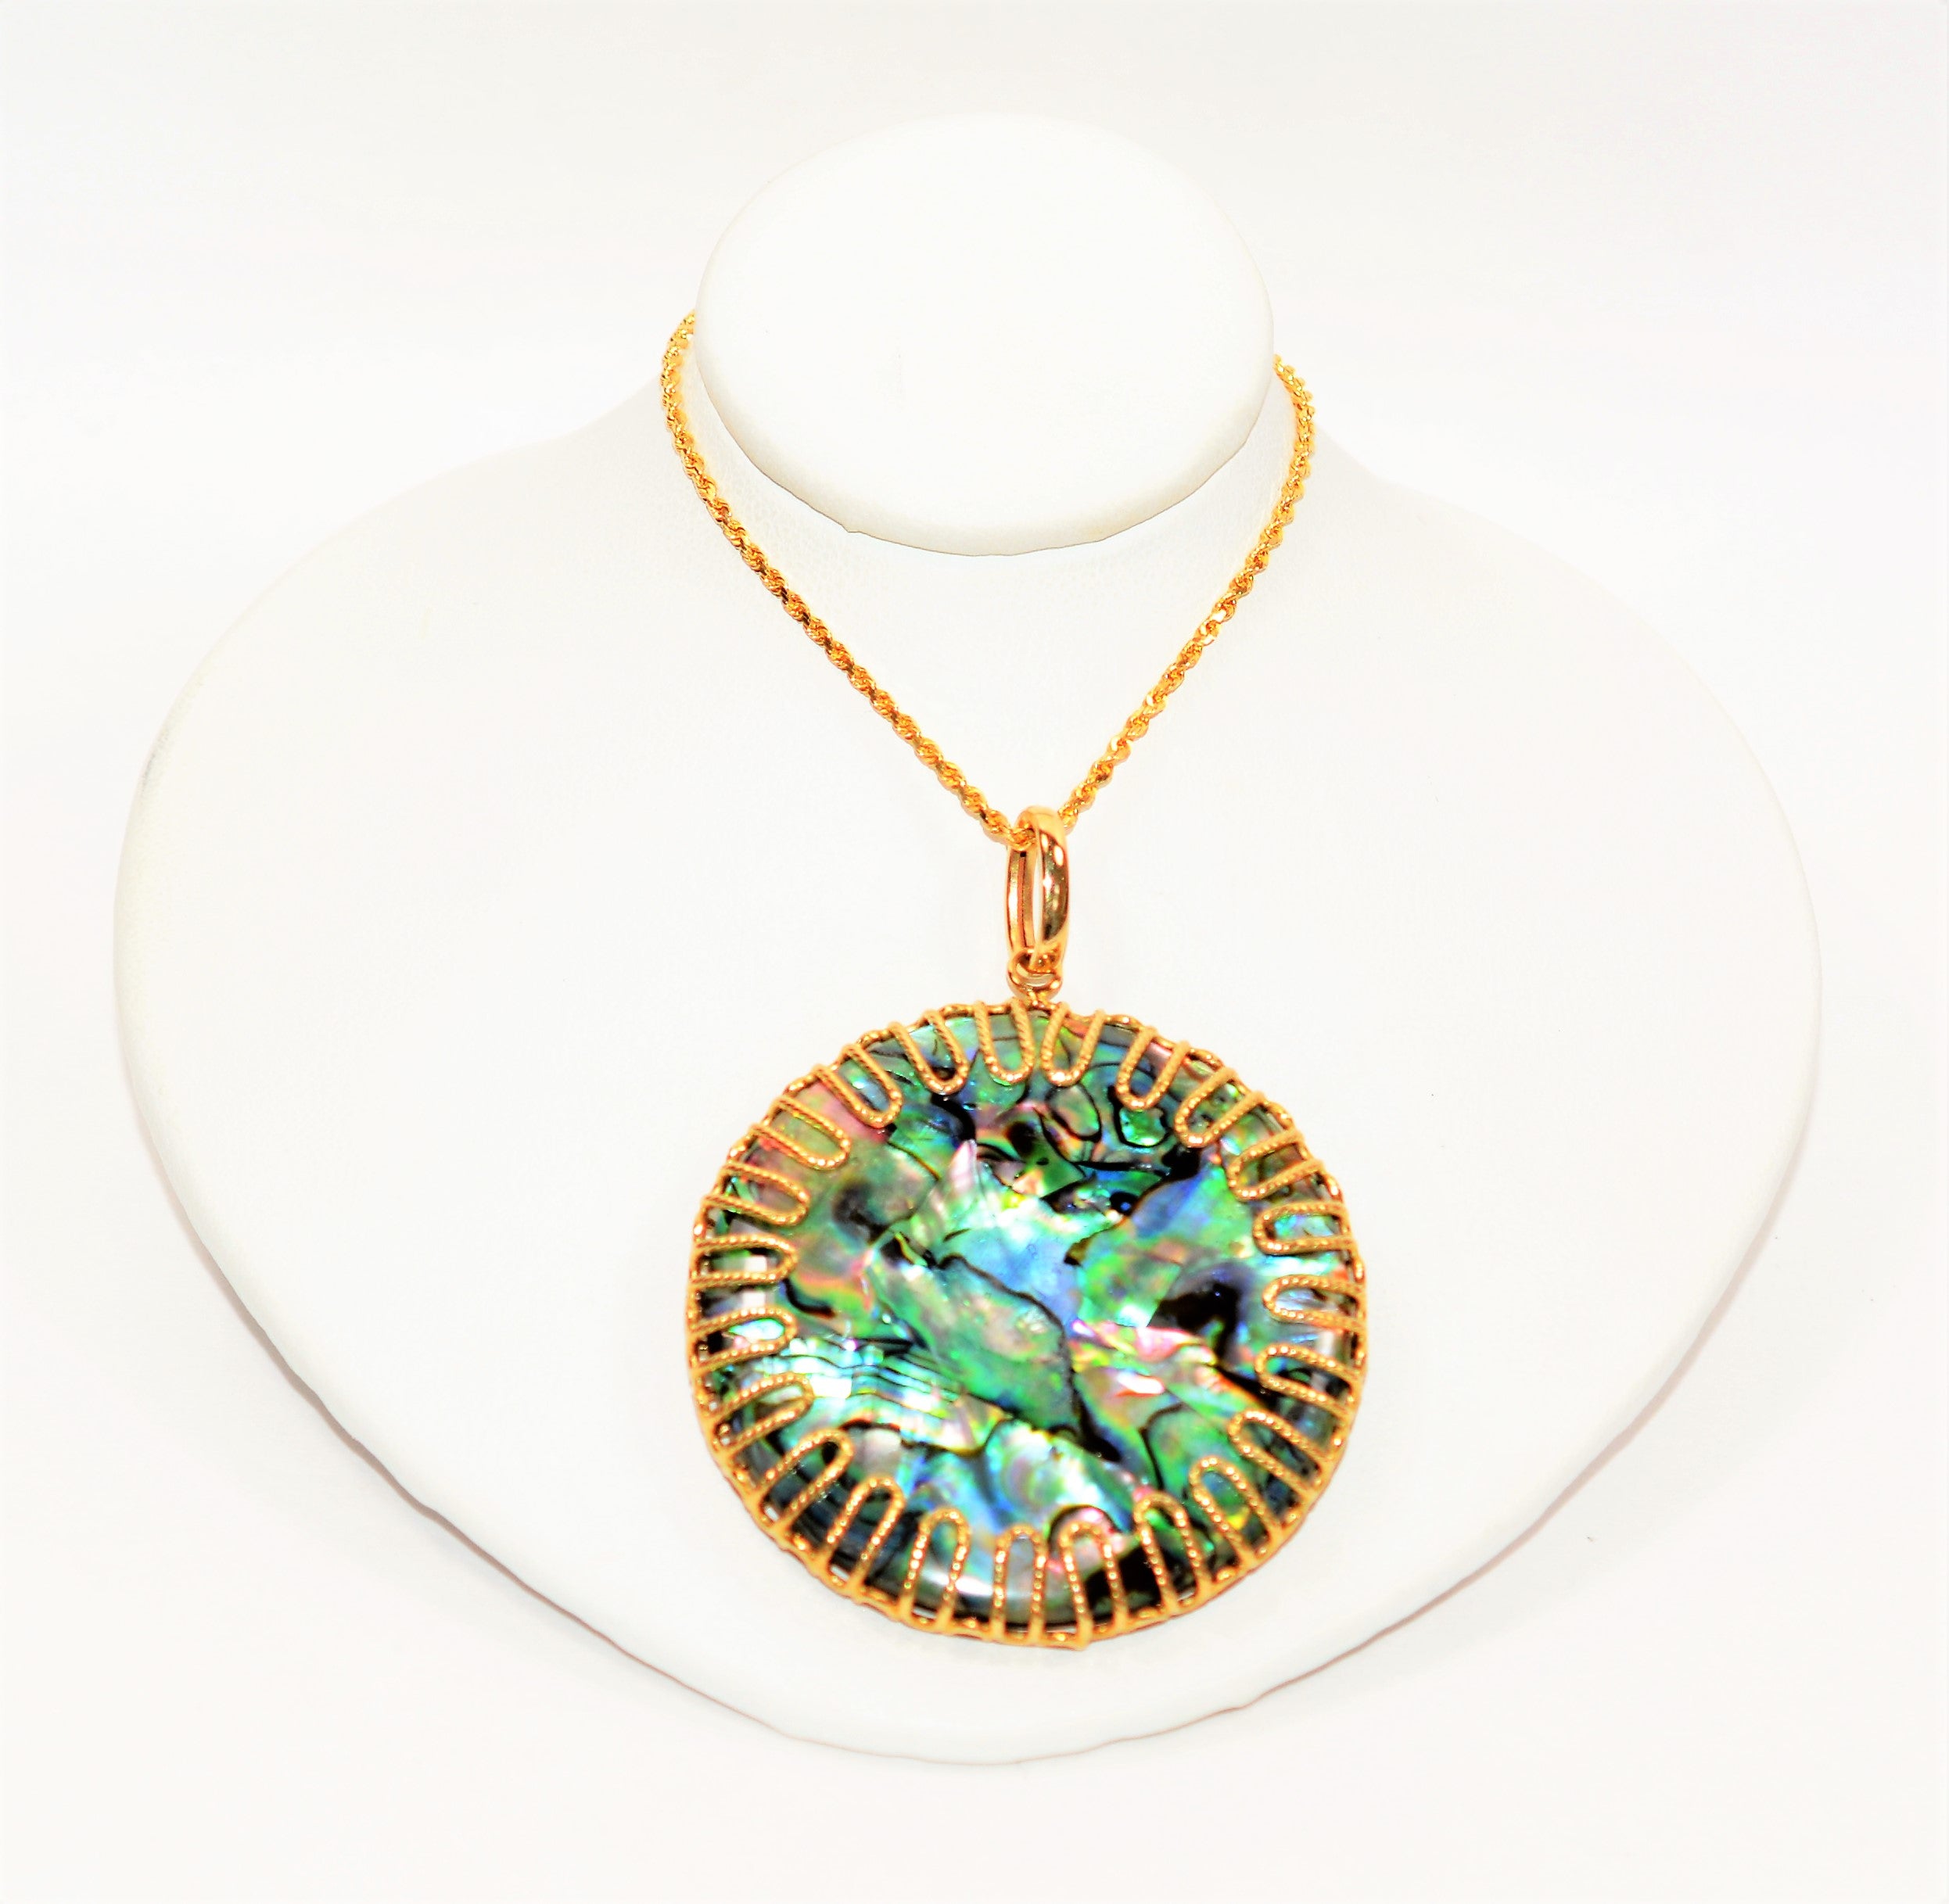 Natural Abalone Necklace 14K Solid Gold 48mm Pendant Necklace Reversible Pendant Gemstone Necklace Statement Necklace Abalone Shell Estate